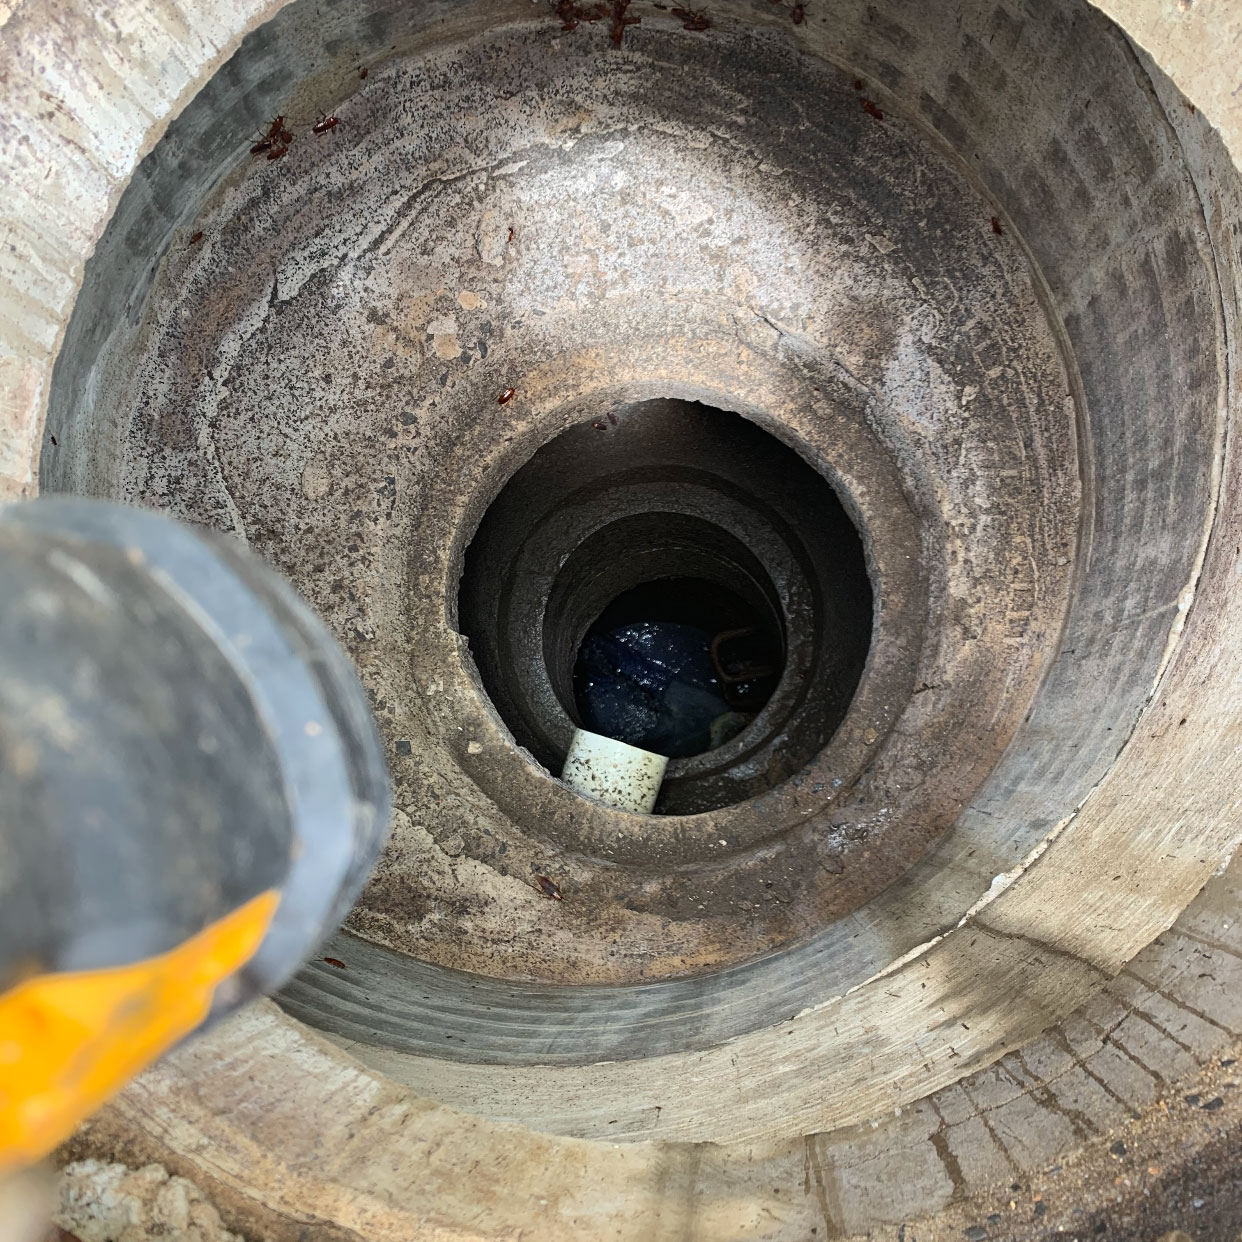 Underwater pipe relining an Australian first (case study)